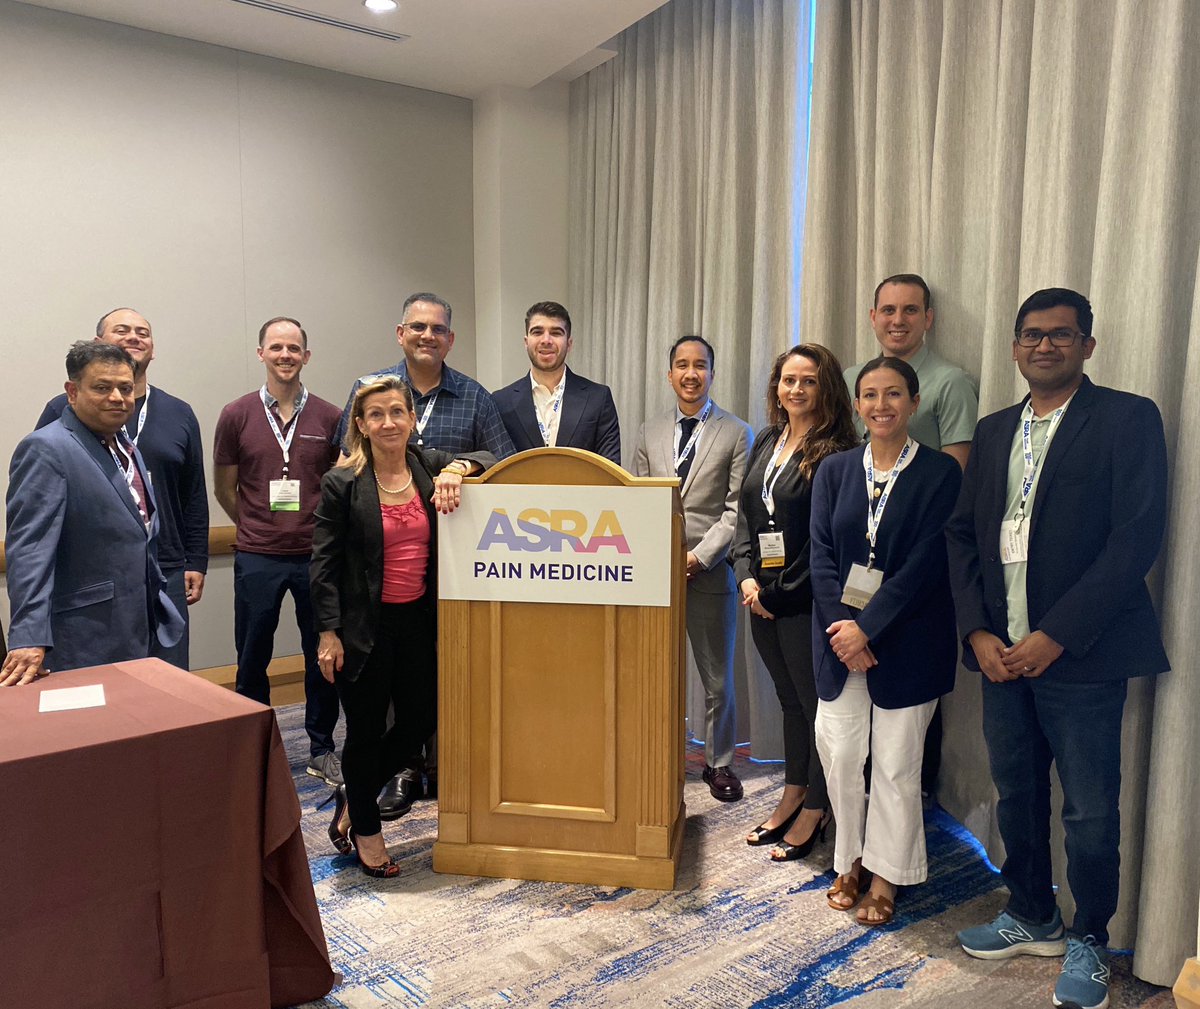 🤩So proud of the great things our #ASRAPedsSIG is doing!  Great meeting with this talented #pedsregional #pedspain group @ASRA_Society #ASRASpring23 

🙌We are where we are due to amazing mentors who have paved the way @SanthanamSuresh @karenboretsky 👏👏